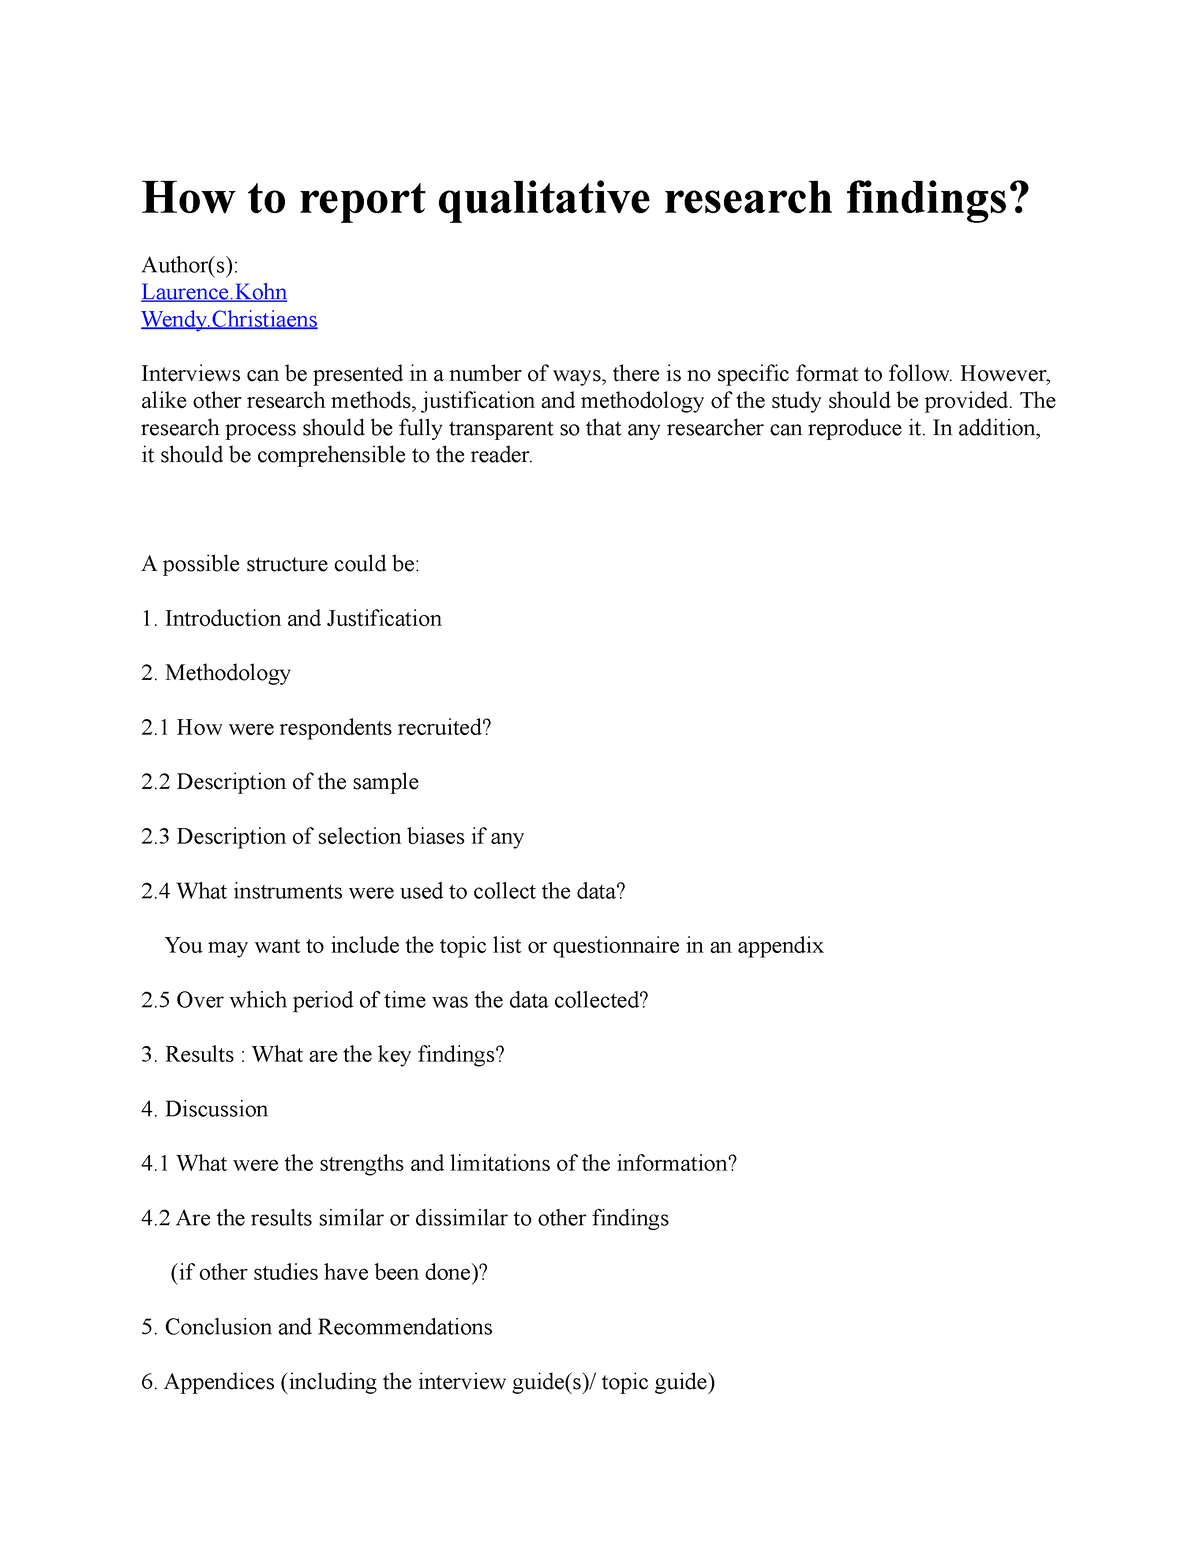 findings and results in qualitative research